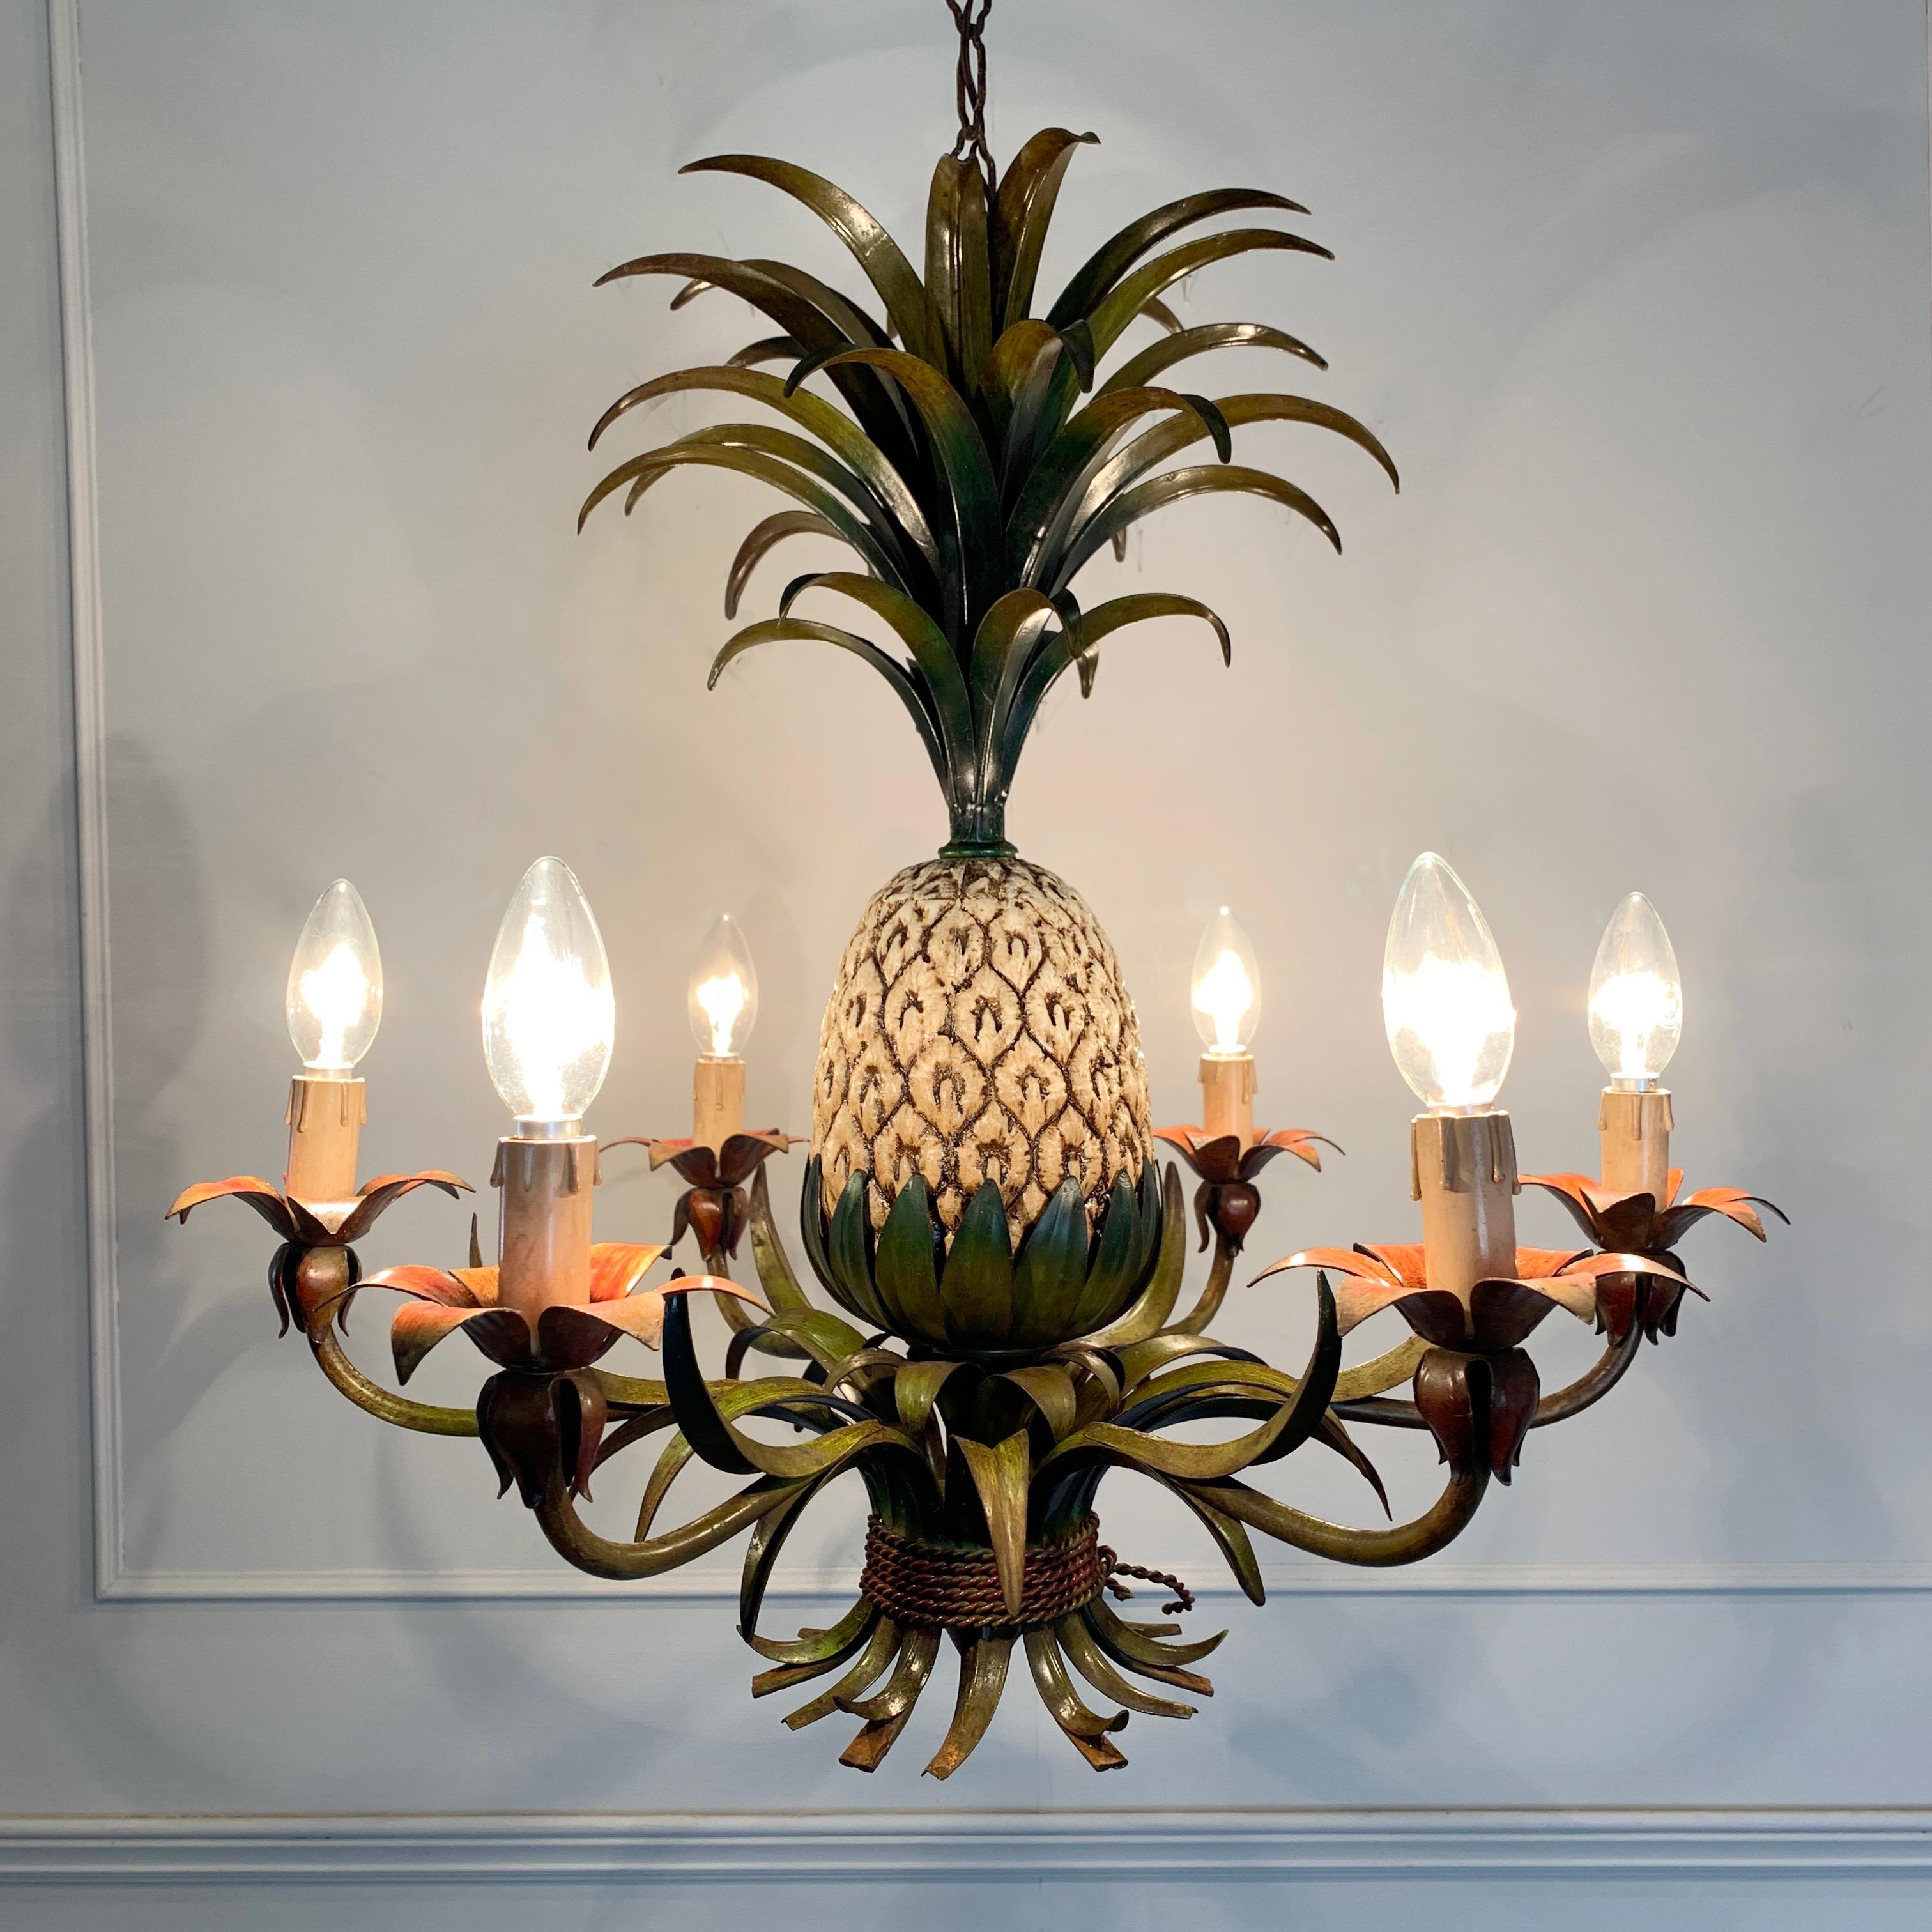 Stunning colored toleware pineapple chandelier
circa 1950s-1960s, Italy/France
The central pineapple is cream colored metal with dark highlights
The leaves and fronds are hand painted in mixed green tones with yellow/orange tones to